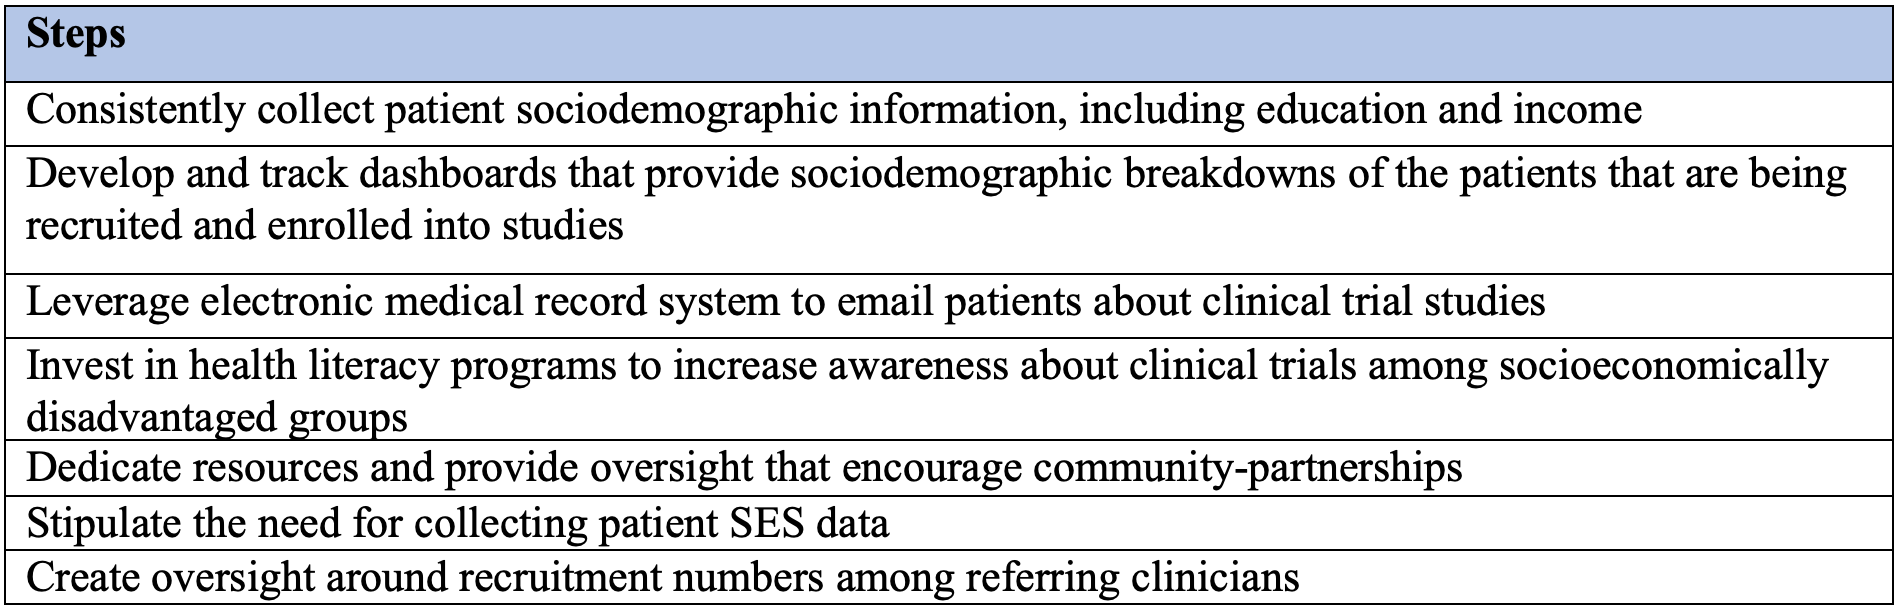 Table 3. Summary of actionable steps that stakeholders can take to improve representation in clinical trials